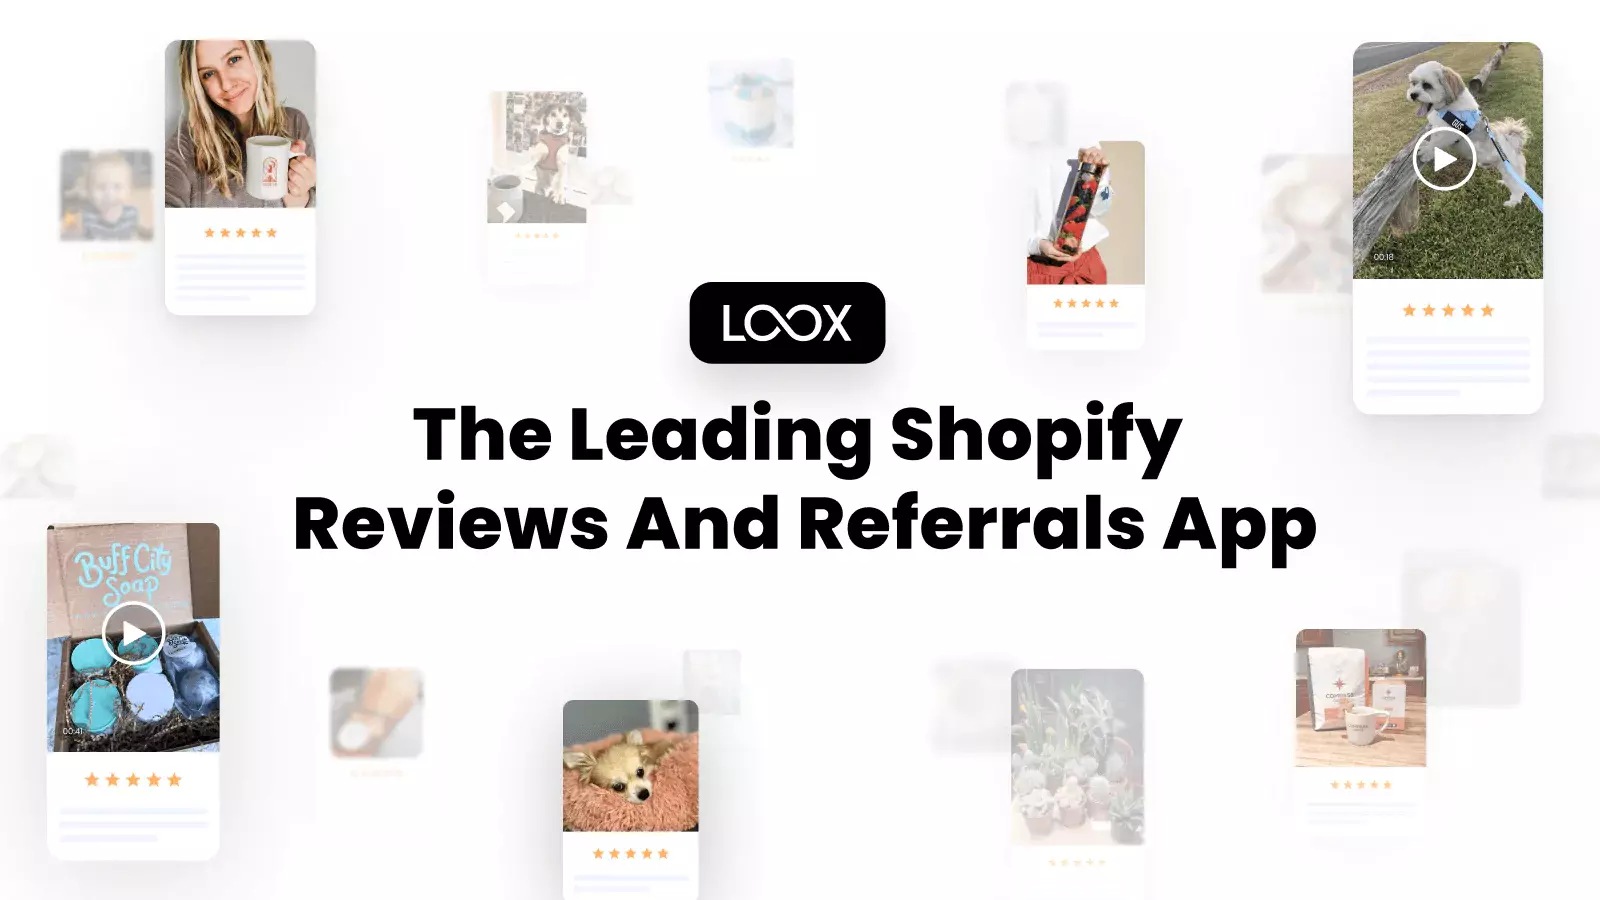 Loox has been used by 90,000 Shopify store owners